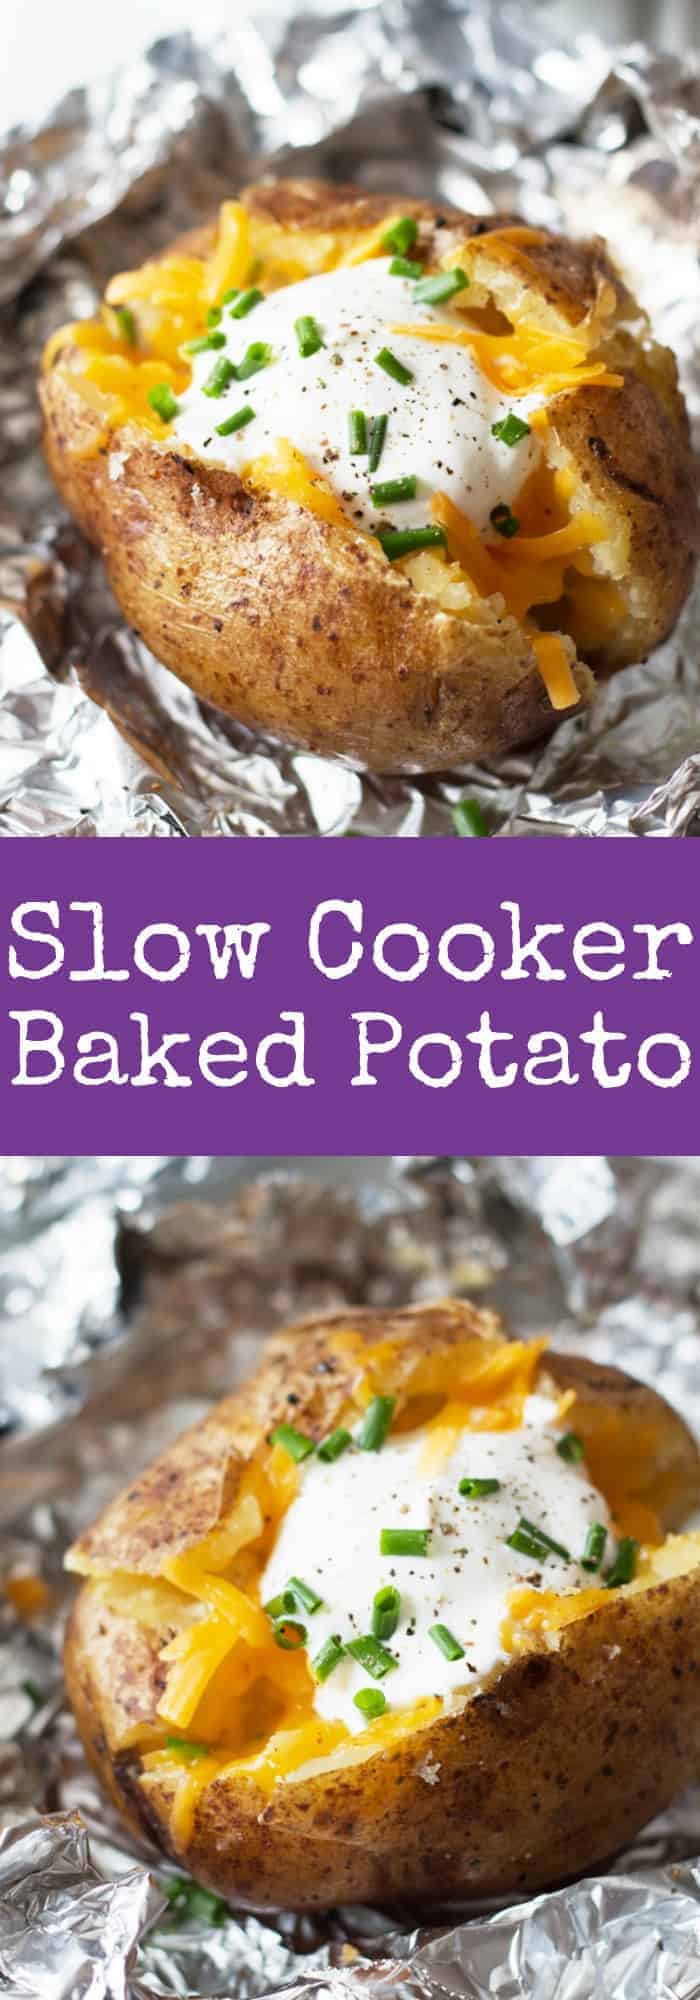 titled image (and shown): slow cooker baked potato